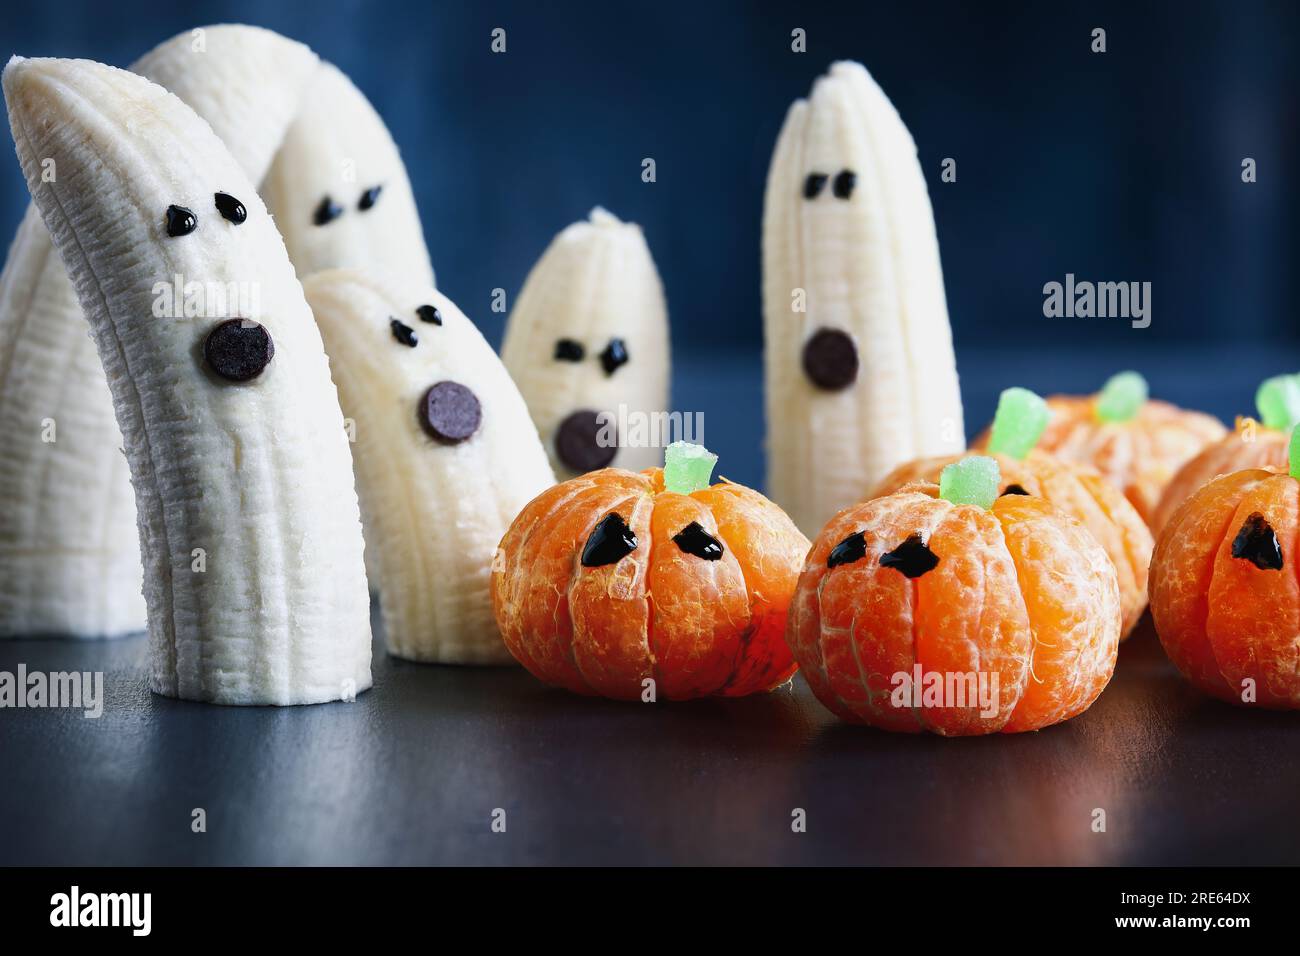 Halloween cute pumpkin orange fruit and scary banana ghosts monsters with chocolate faces. Healthy dessert snack with funny faces for child's party Stock Photo